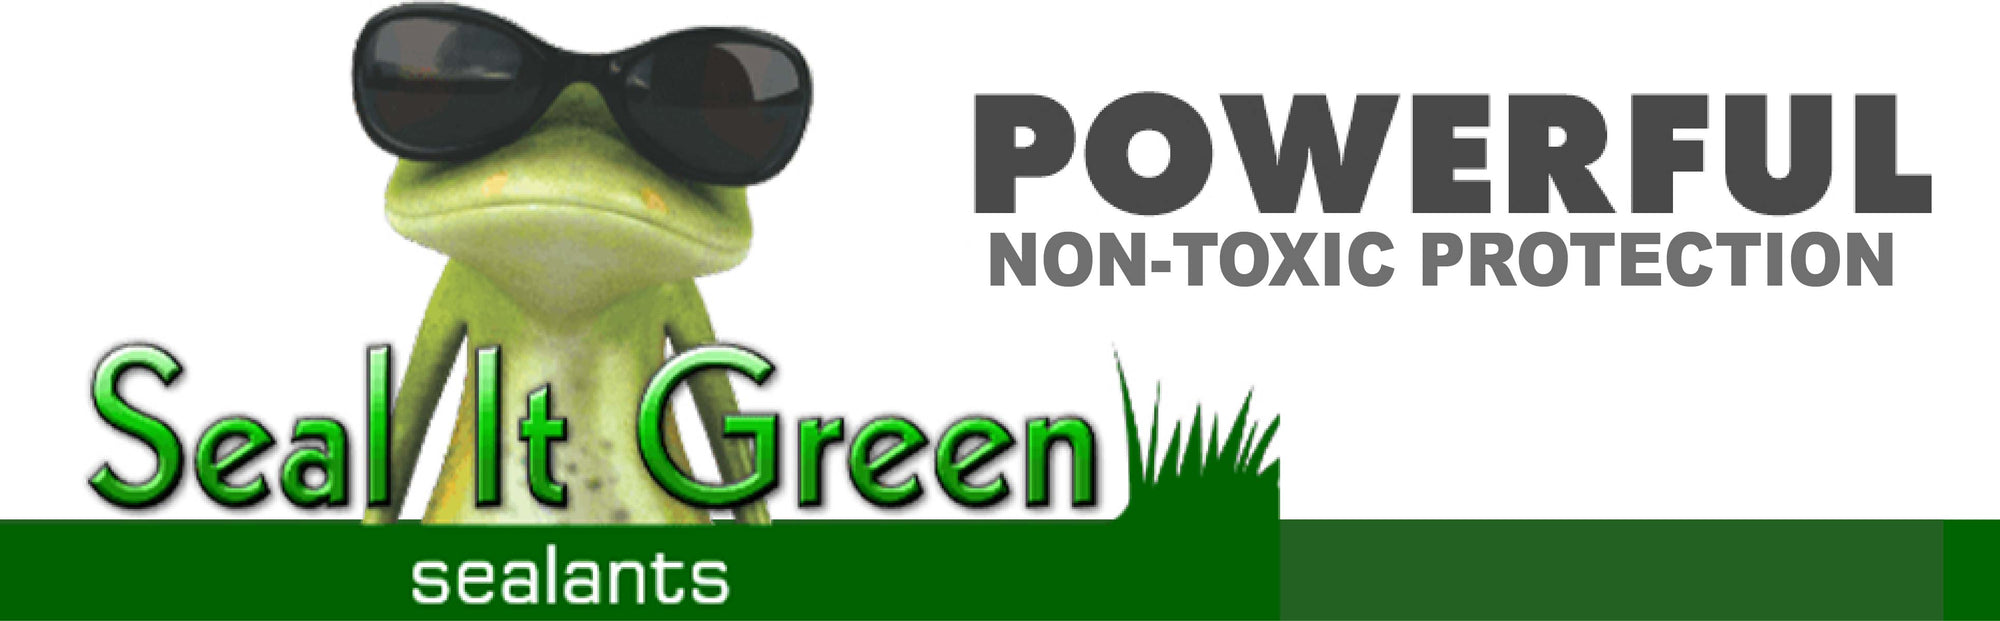 Seal It Green Powerful Non-toxic protection